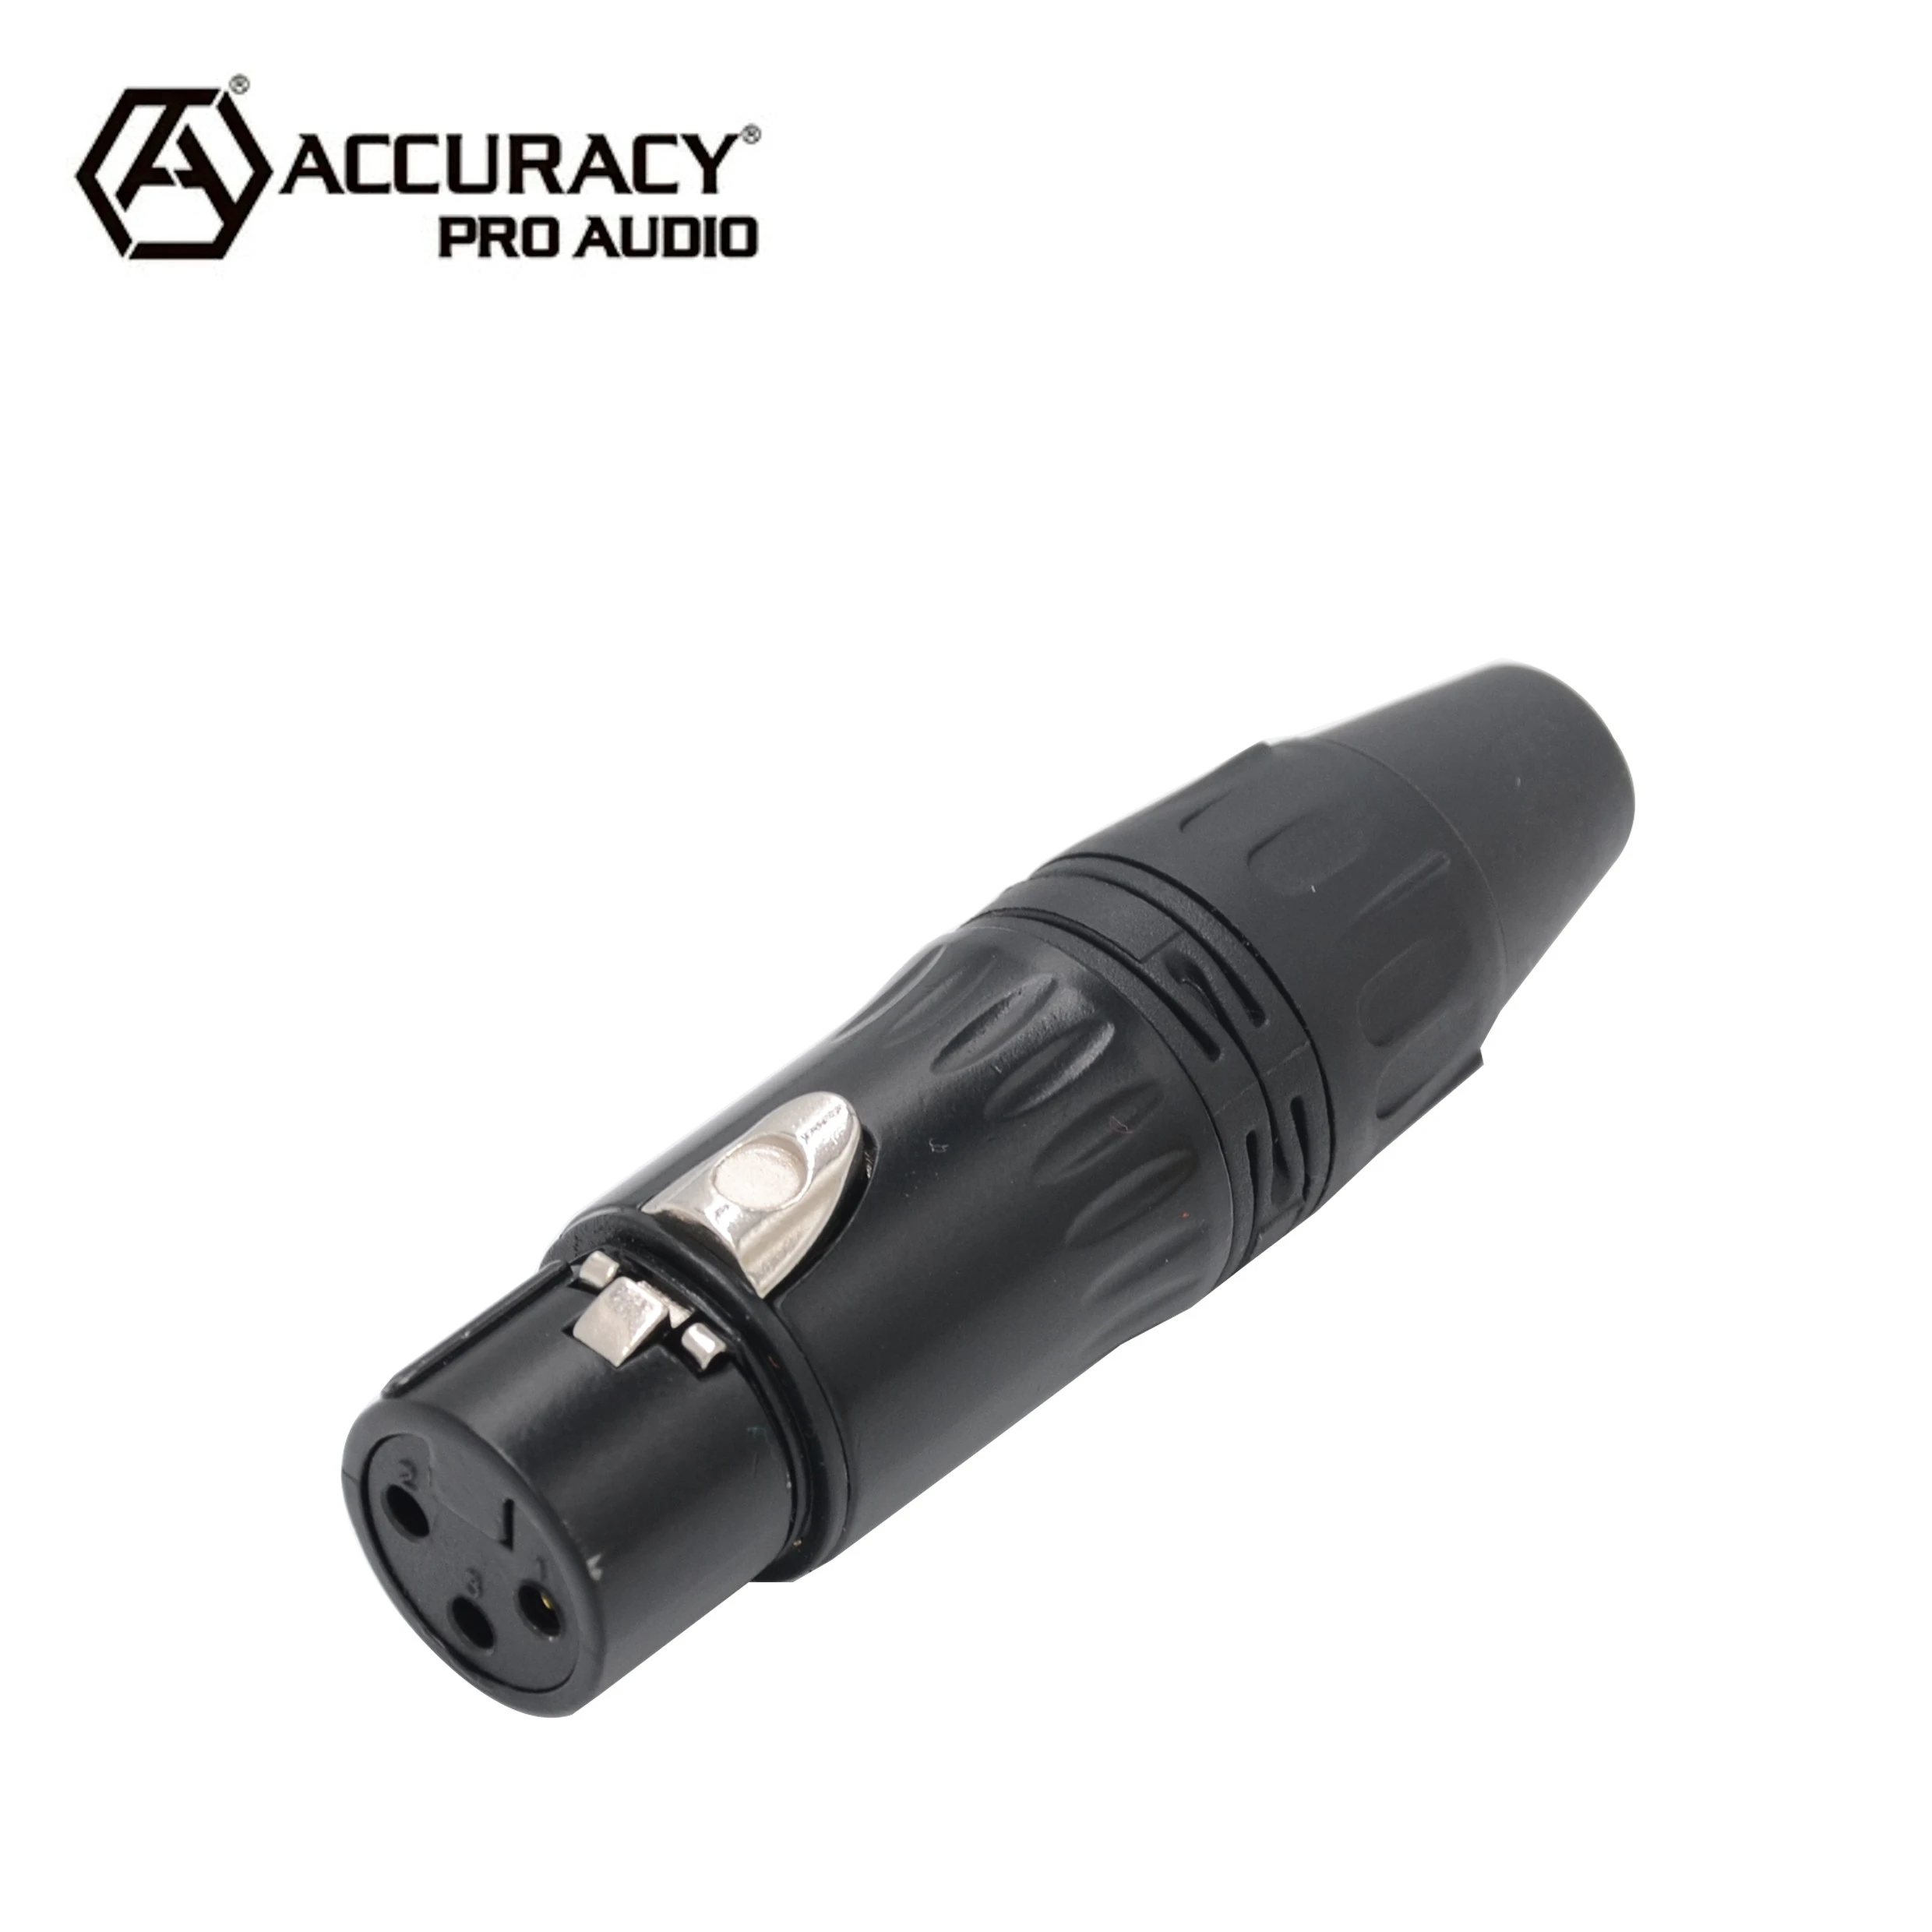 Accuracy Pro Audio XLR302 3 Pin Electrophoresis Black Shell Speaker Cable Canon Plugs XLR Connector Cable Connector